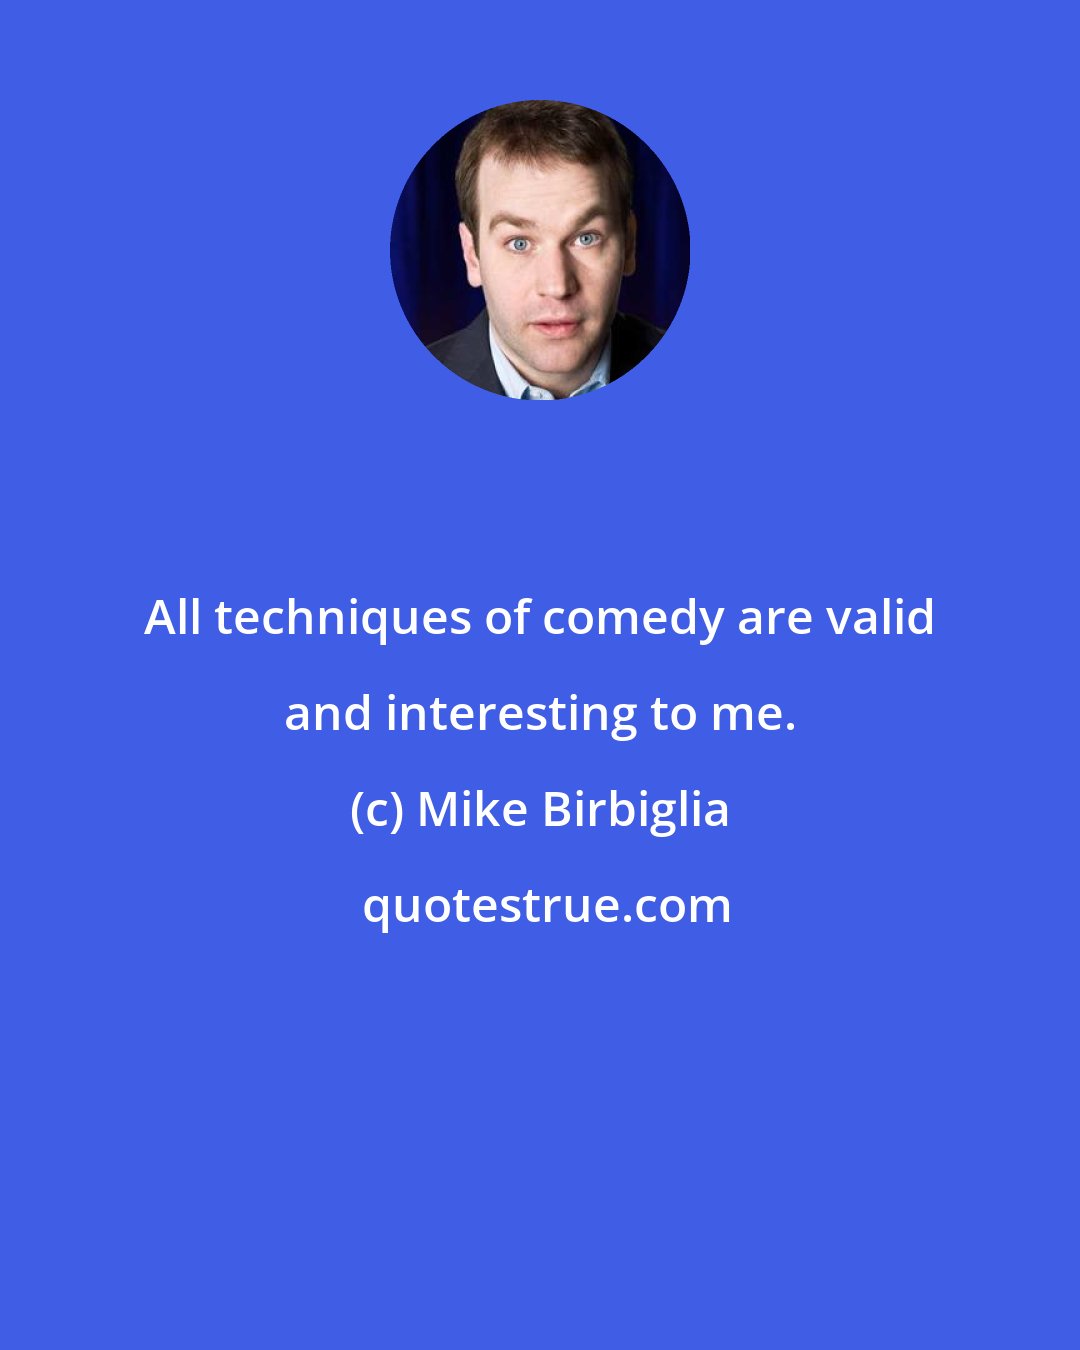 Mike Birbiglia: All techniques of comedy are valid and interesting to me.